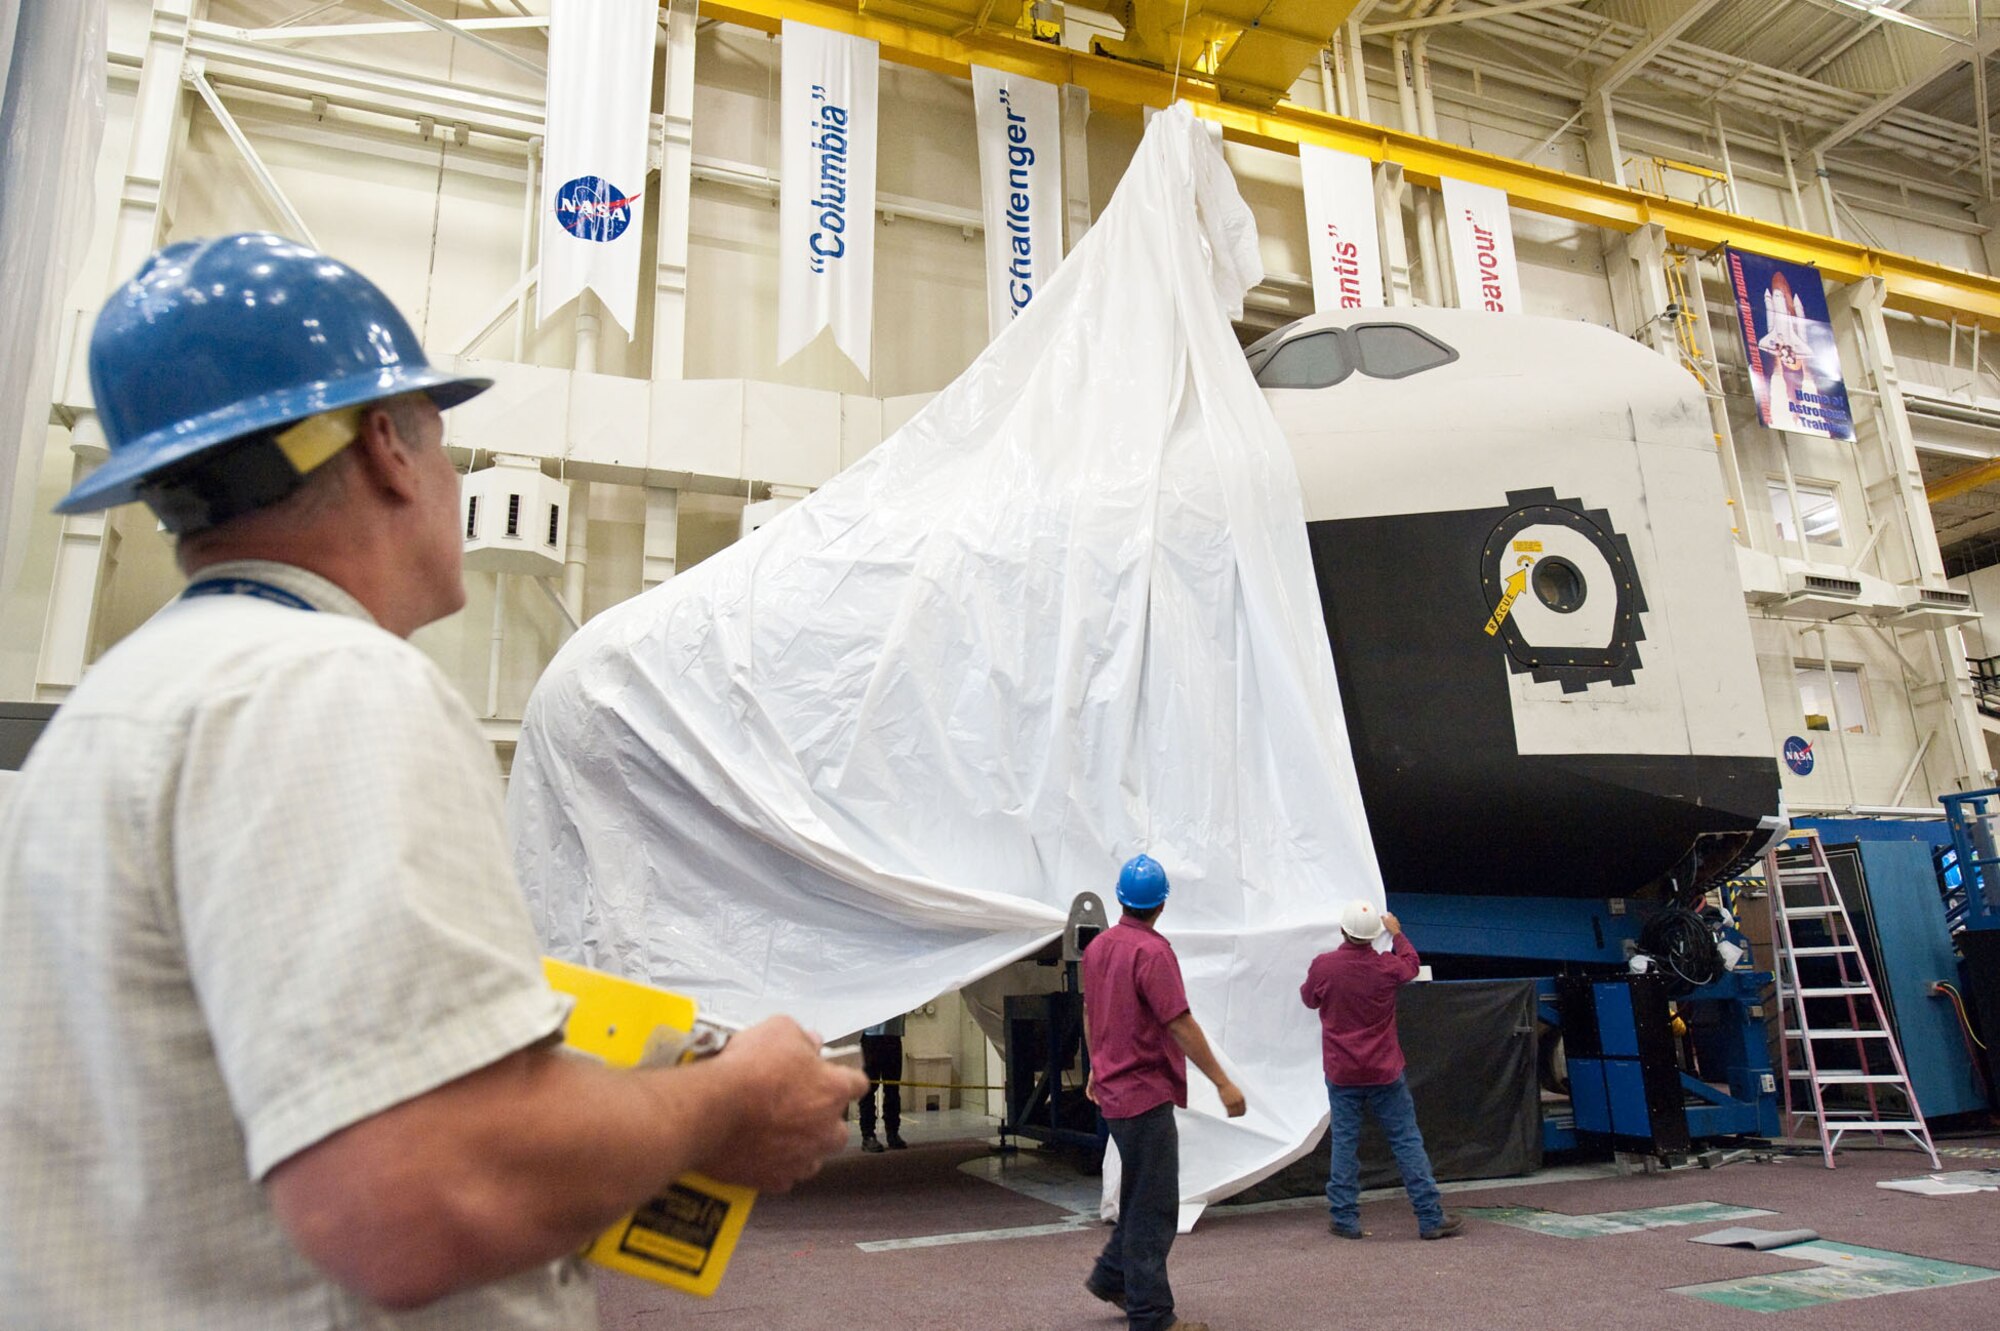 The NASA Crew Compartment Trainer is shrink-wrapped by NASA officials in Houston on July 9, 2012, in preparation for its move from the Johnson Space Center to the National Museum of the U.S. Air Force. The museum is located at Wright-Patterson Air Force Base, Ohio. (NASA photo)
